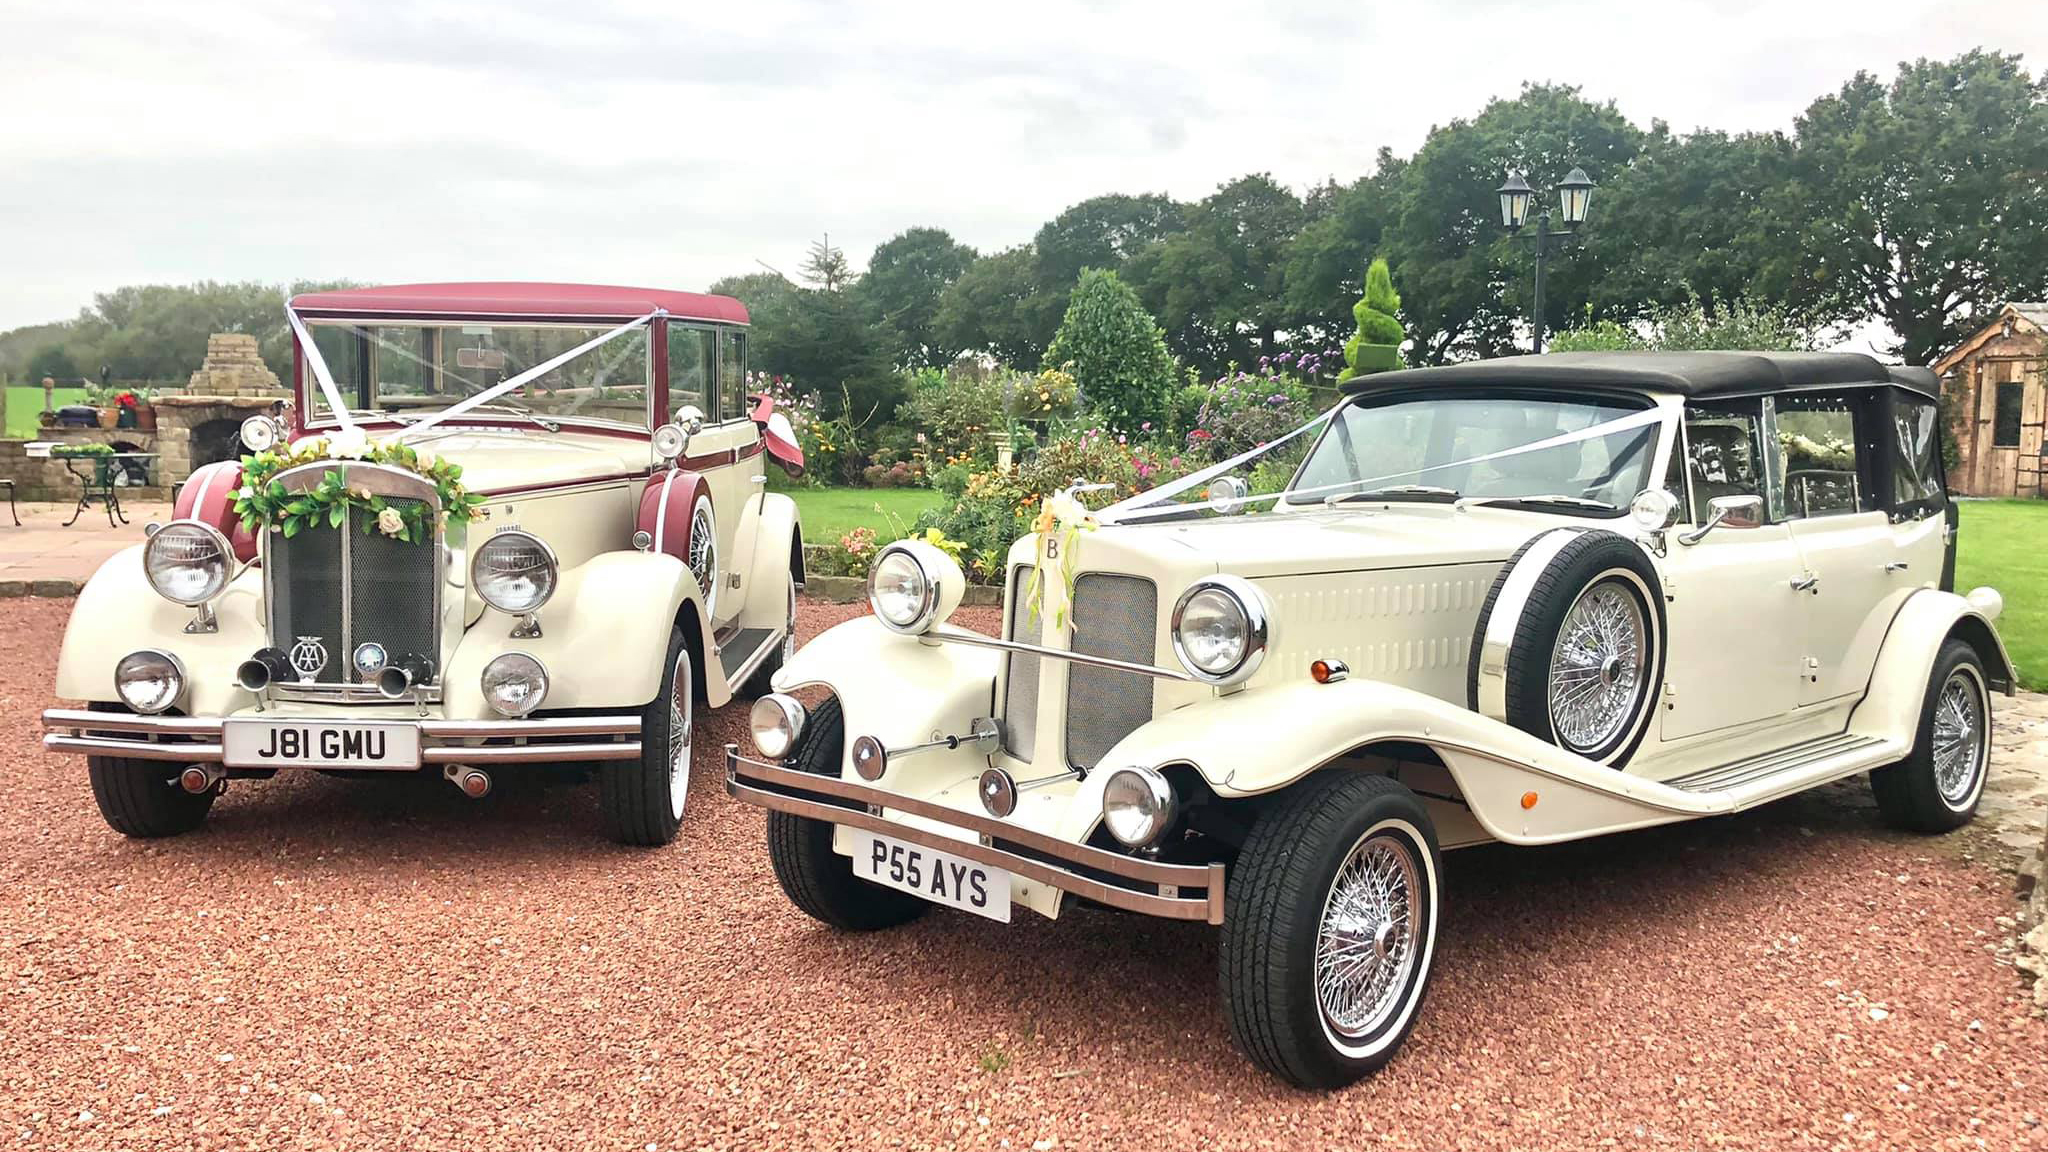 Two vintage wedding cars decorated with white ribbons and bows at a local Chorley wedding. Both vehicles are parked side-by-side